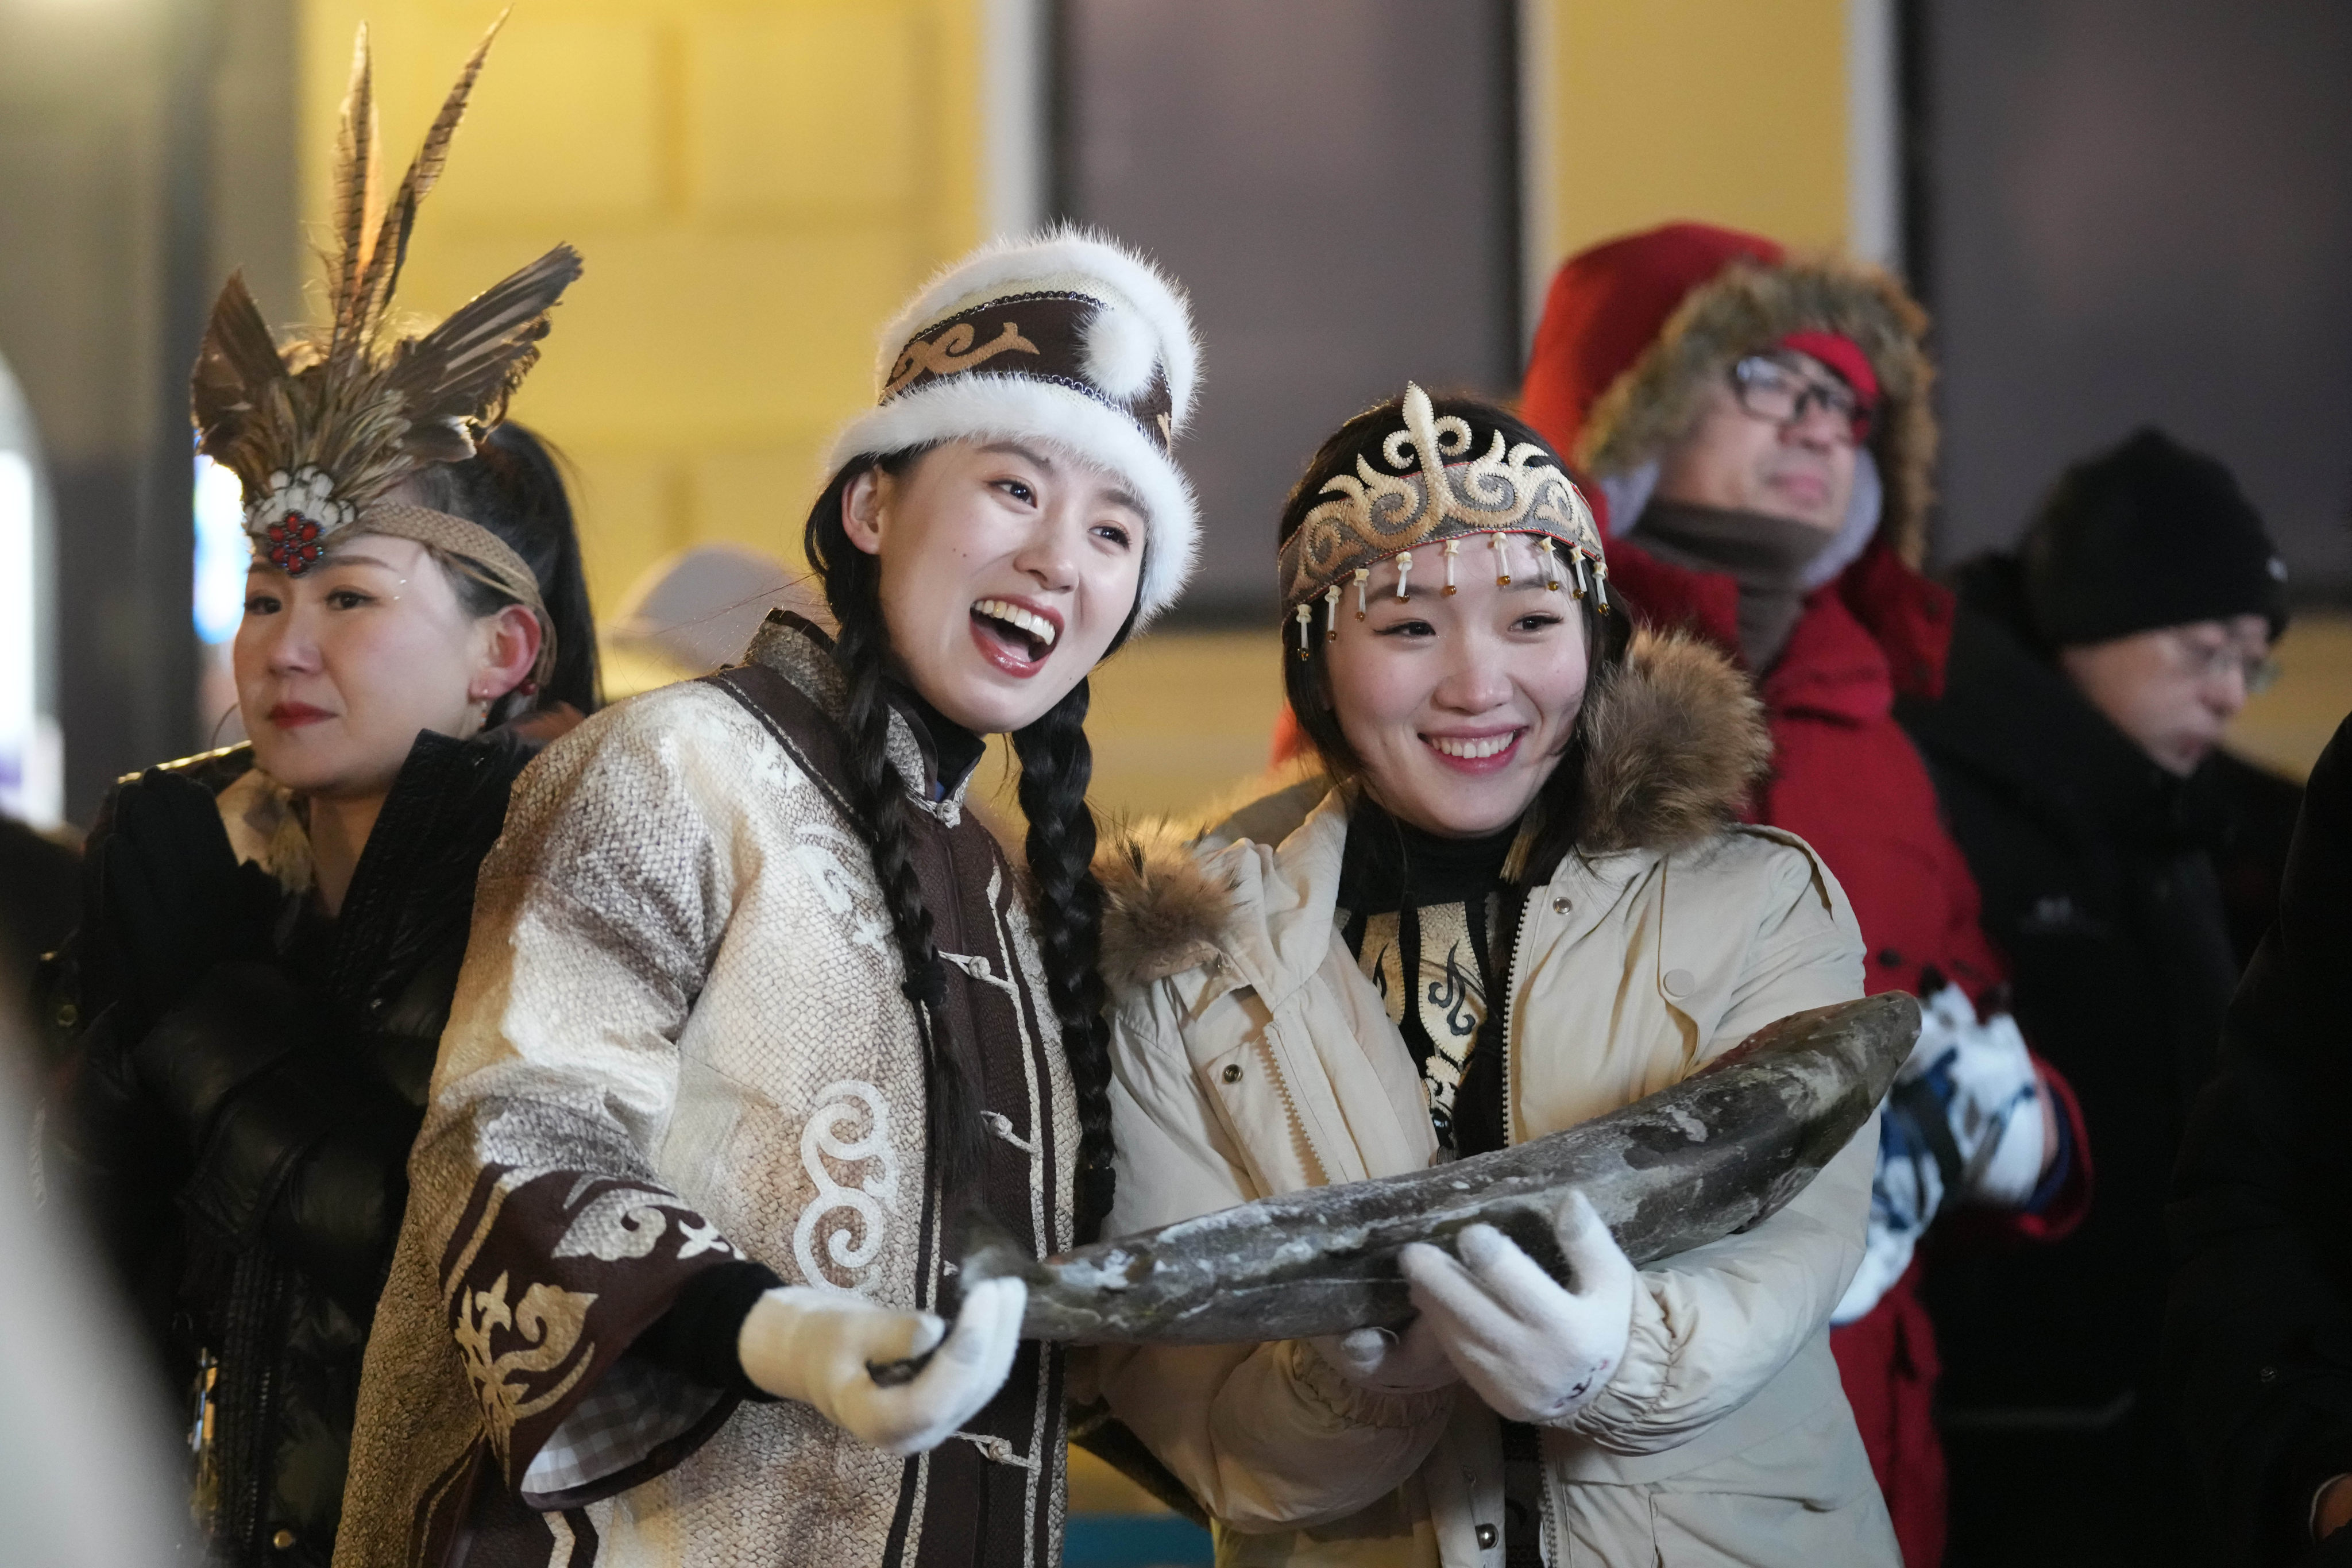 People wear traditional clothing of the Hezhe ethnic group of northeast China at an event in Heilongjiang province on January 6. Photo: Xinhua